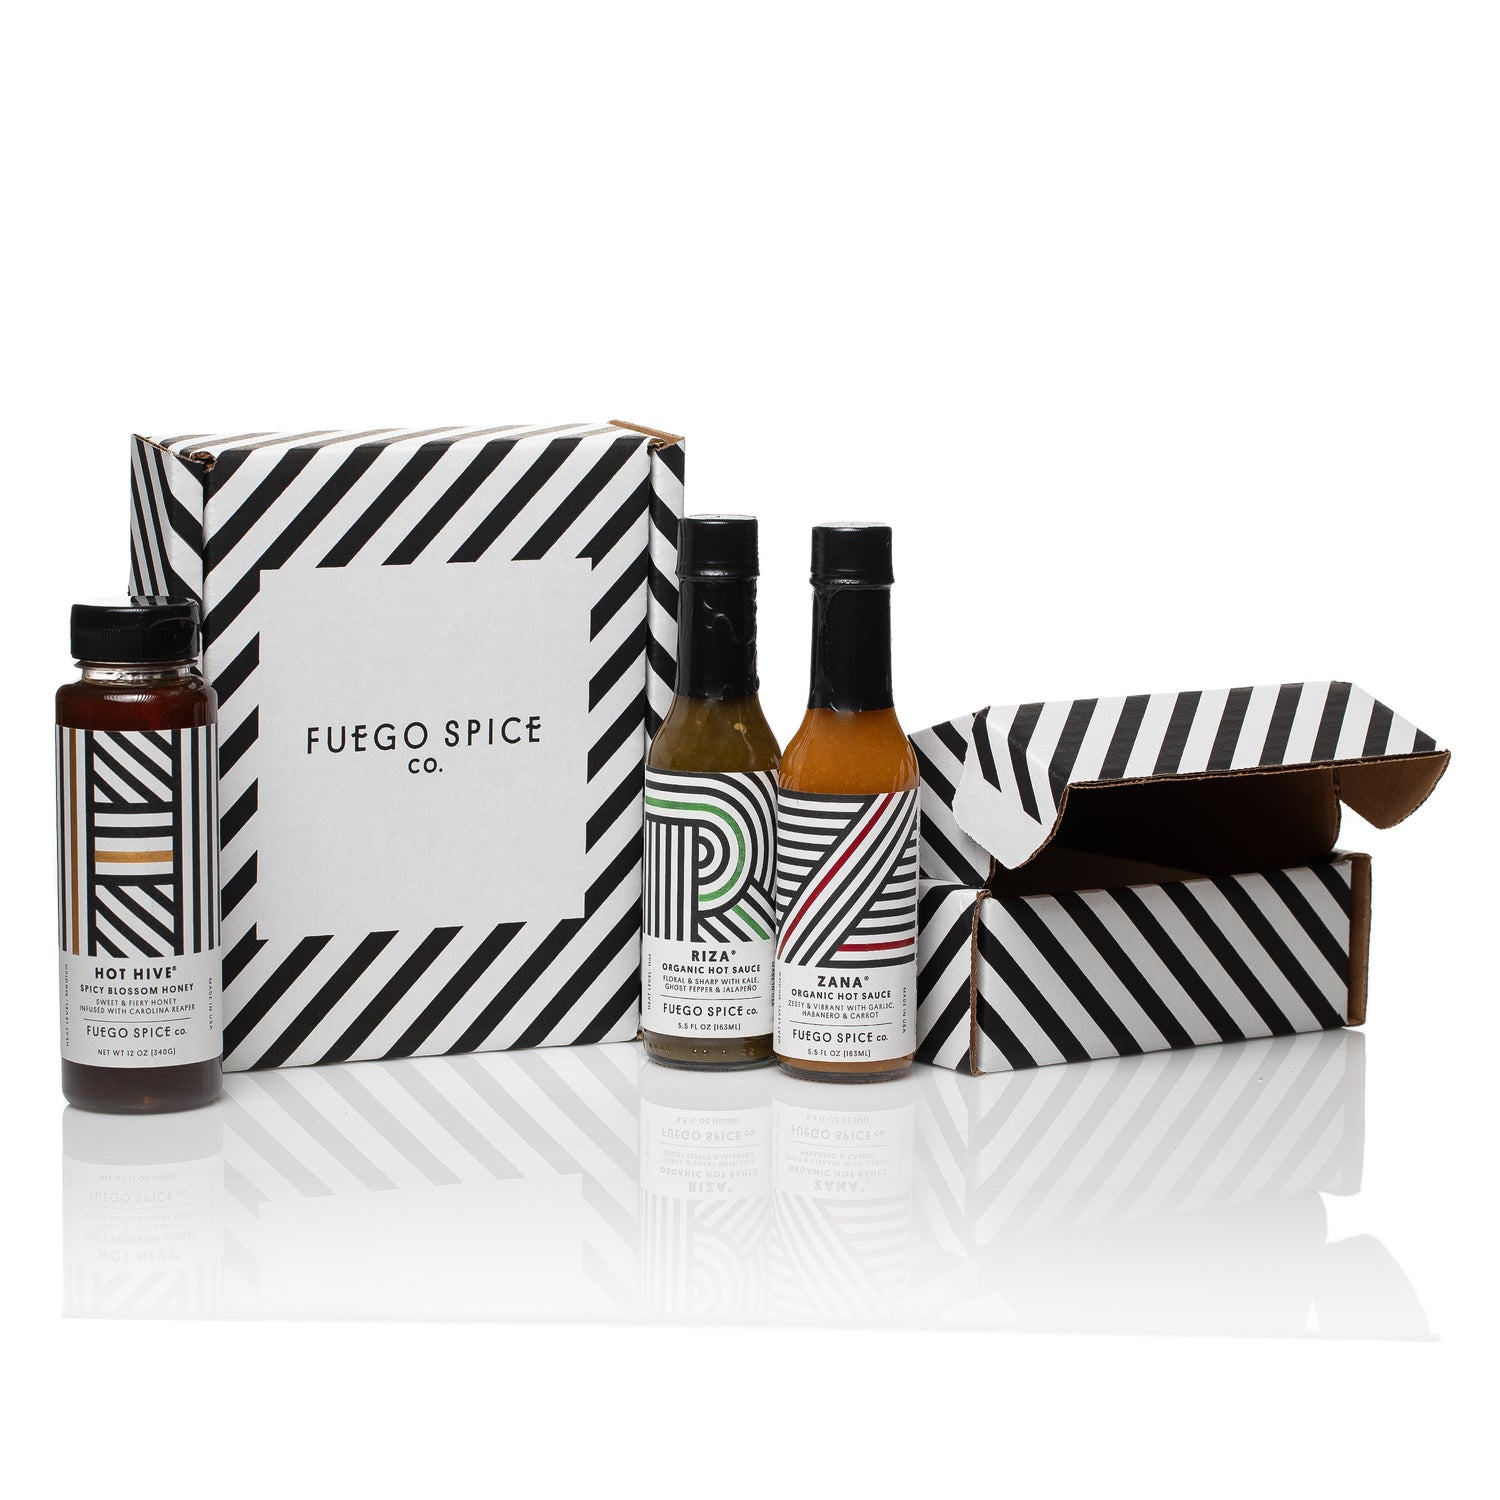 Fuego Spice Co. 3-Pack Gift Set